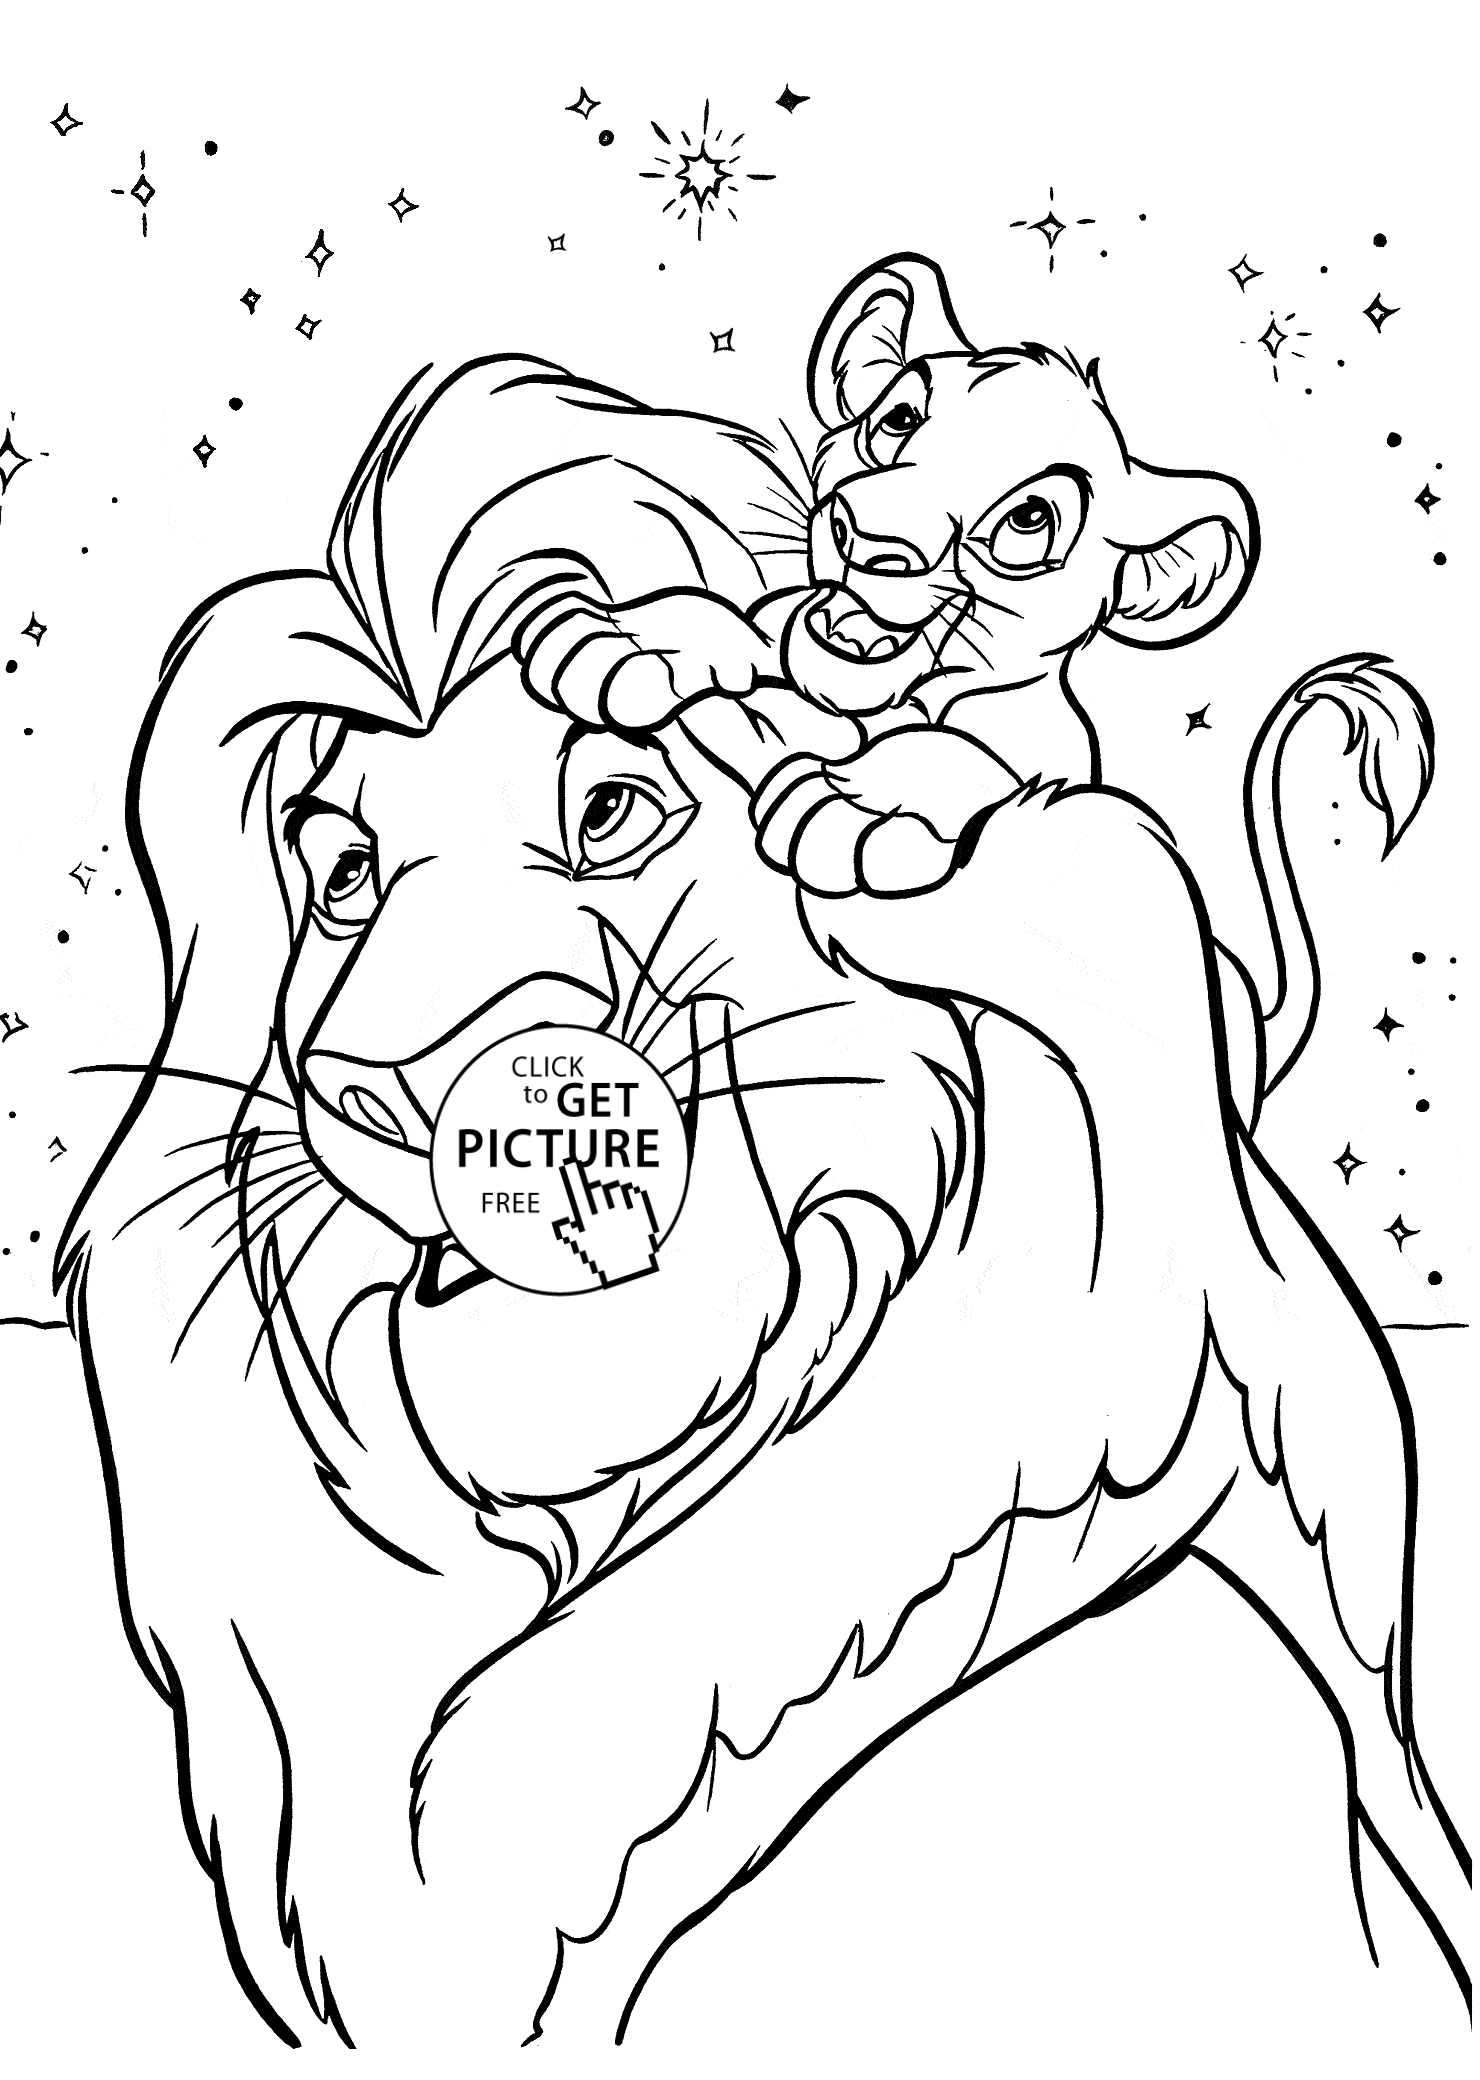 Disney Free Coloring Pages Printable - Coloring Home